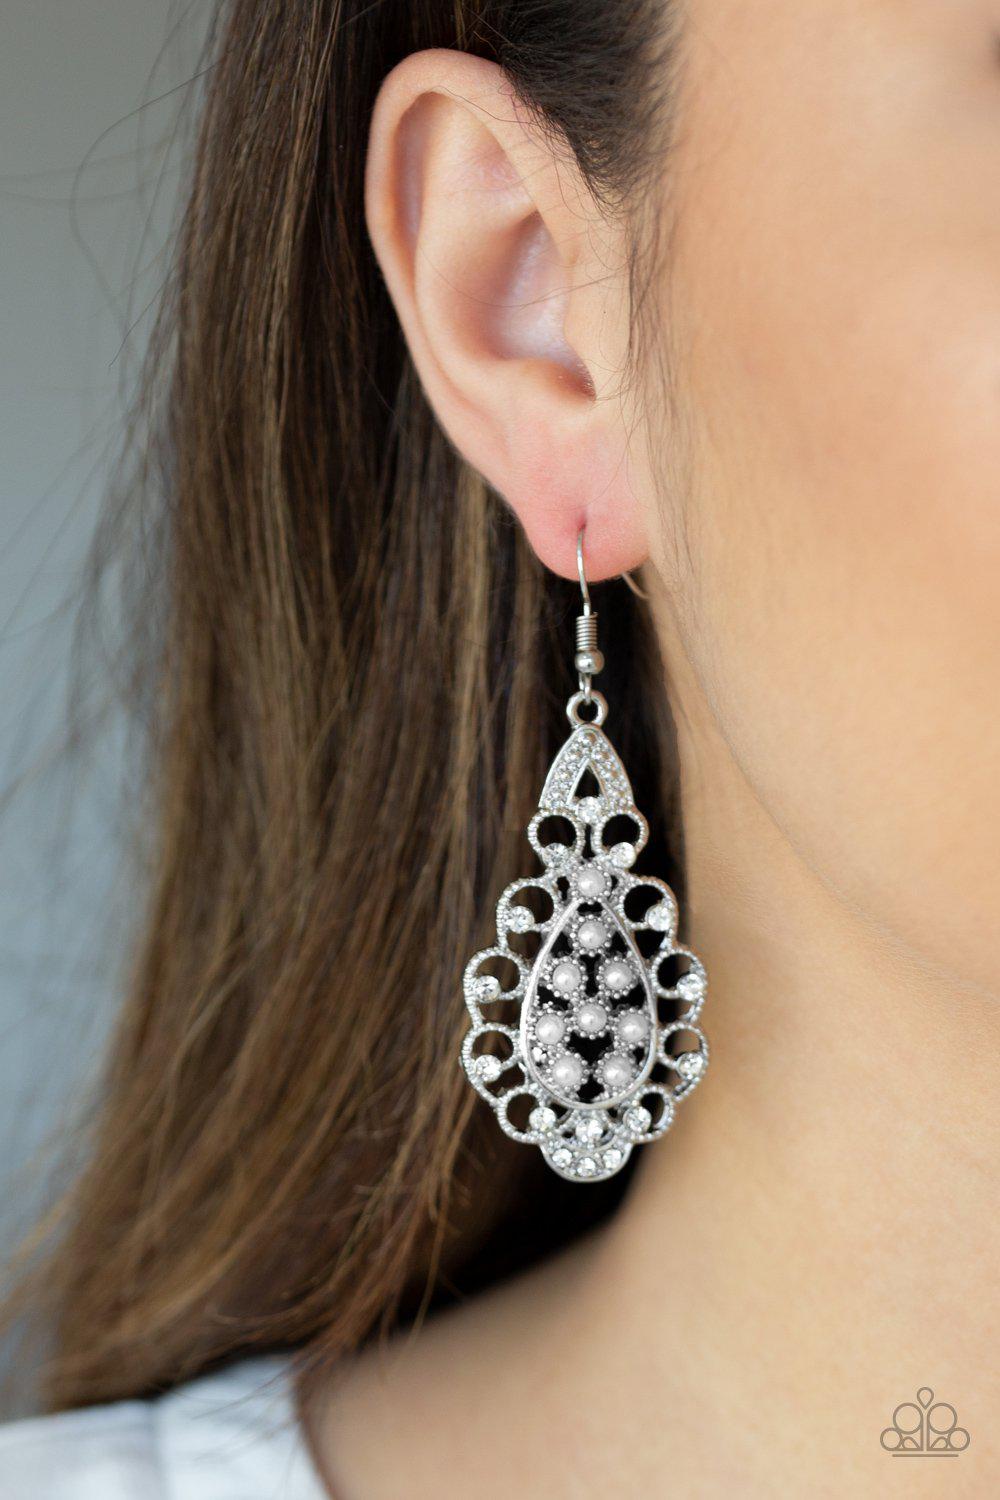 Sprinkle On The Sparkle White Pearl Earrings - Paparazzi Accessories-CarasShop.com - $5 Jewelry by Cara Jewels